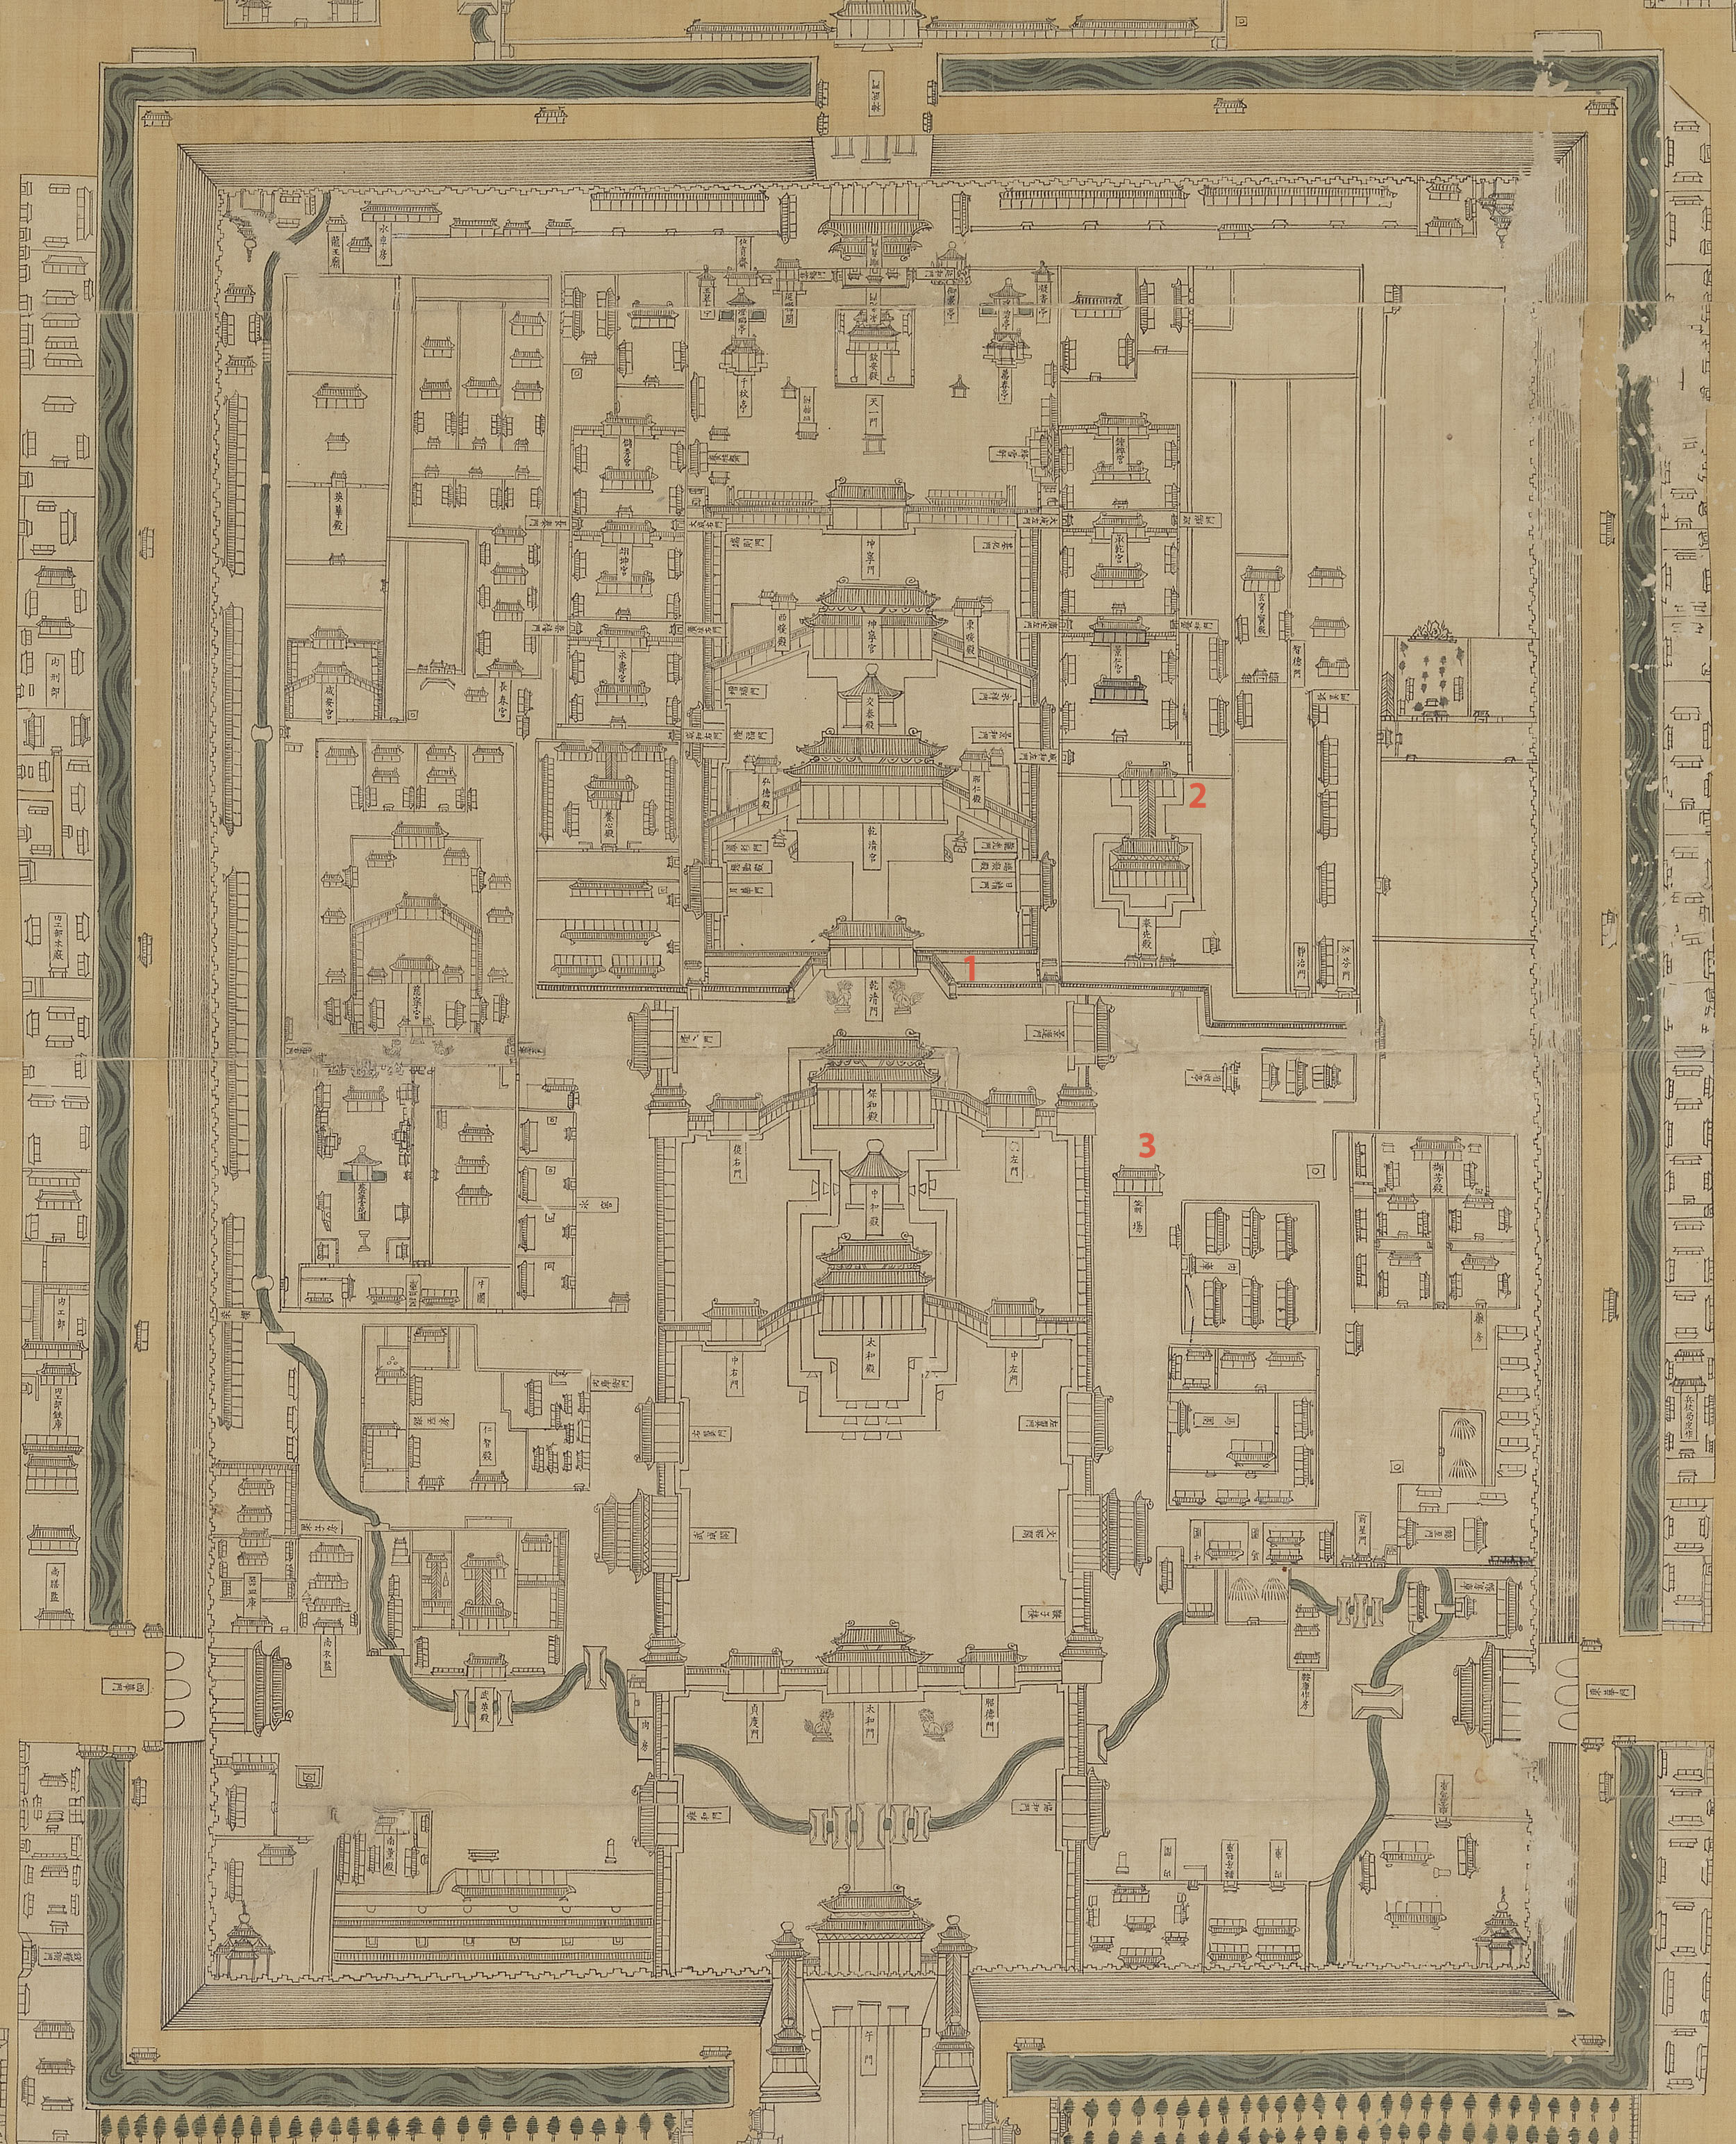 Huangcheng Gongdian Yashutu (Map of the Imperial Palace, Palaces, and Government Offices)